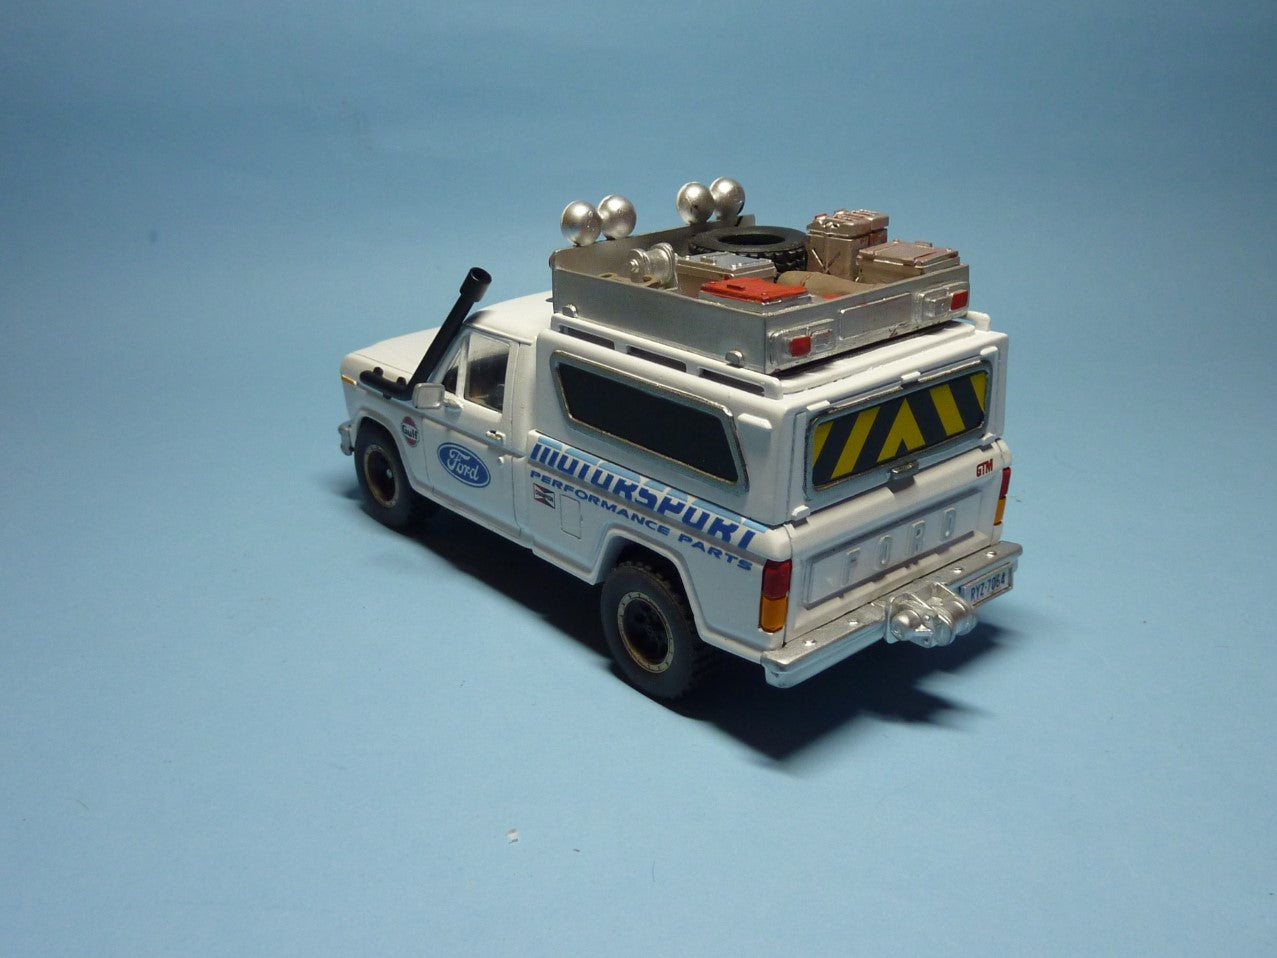 Ford F100, Support Vehicle, 1981 (TRU-112)